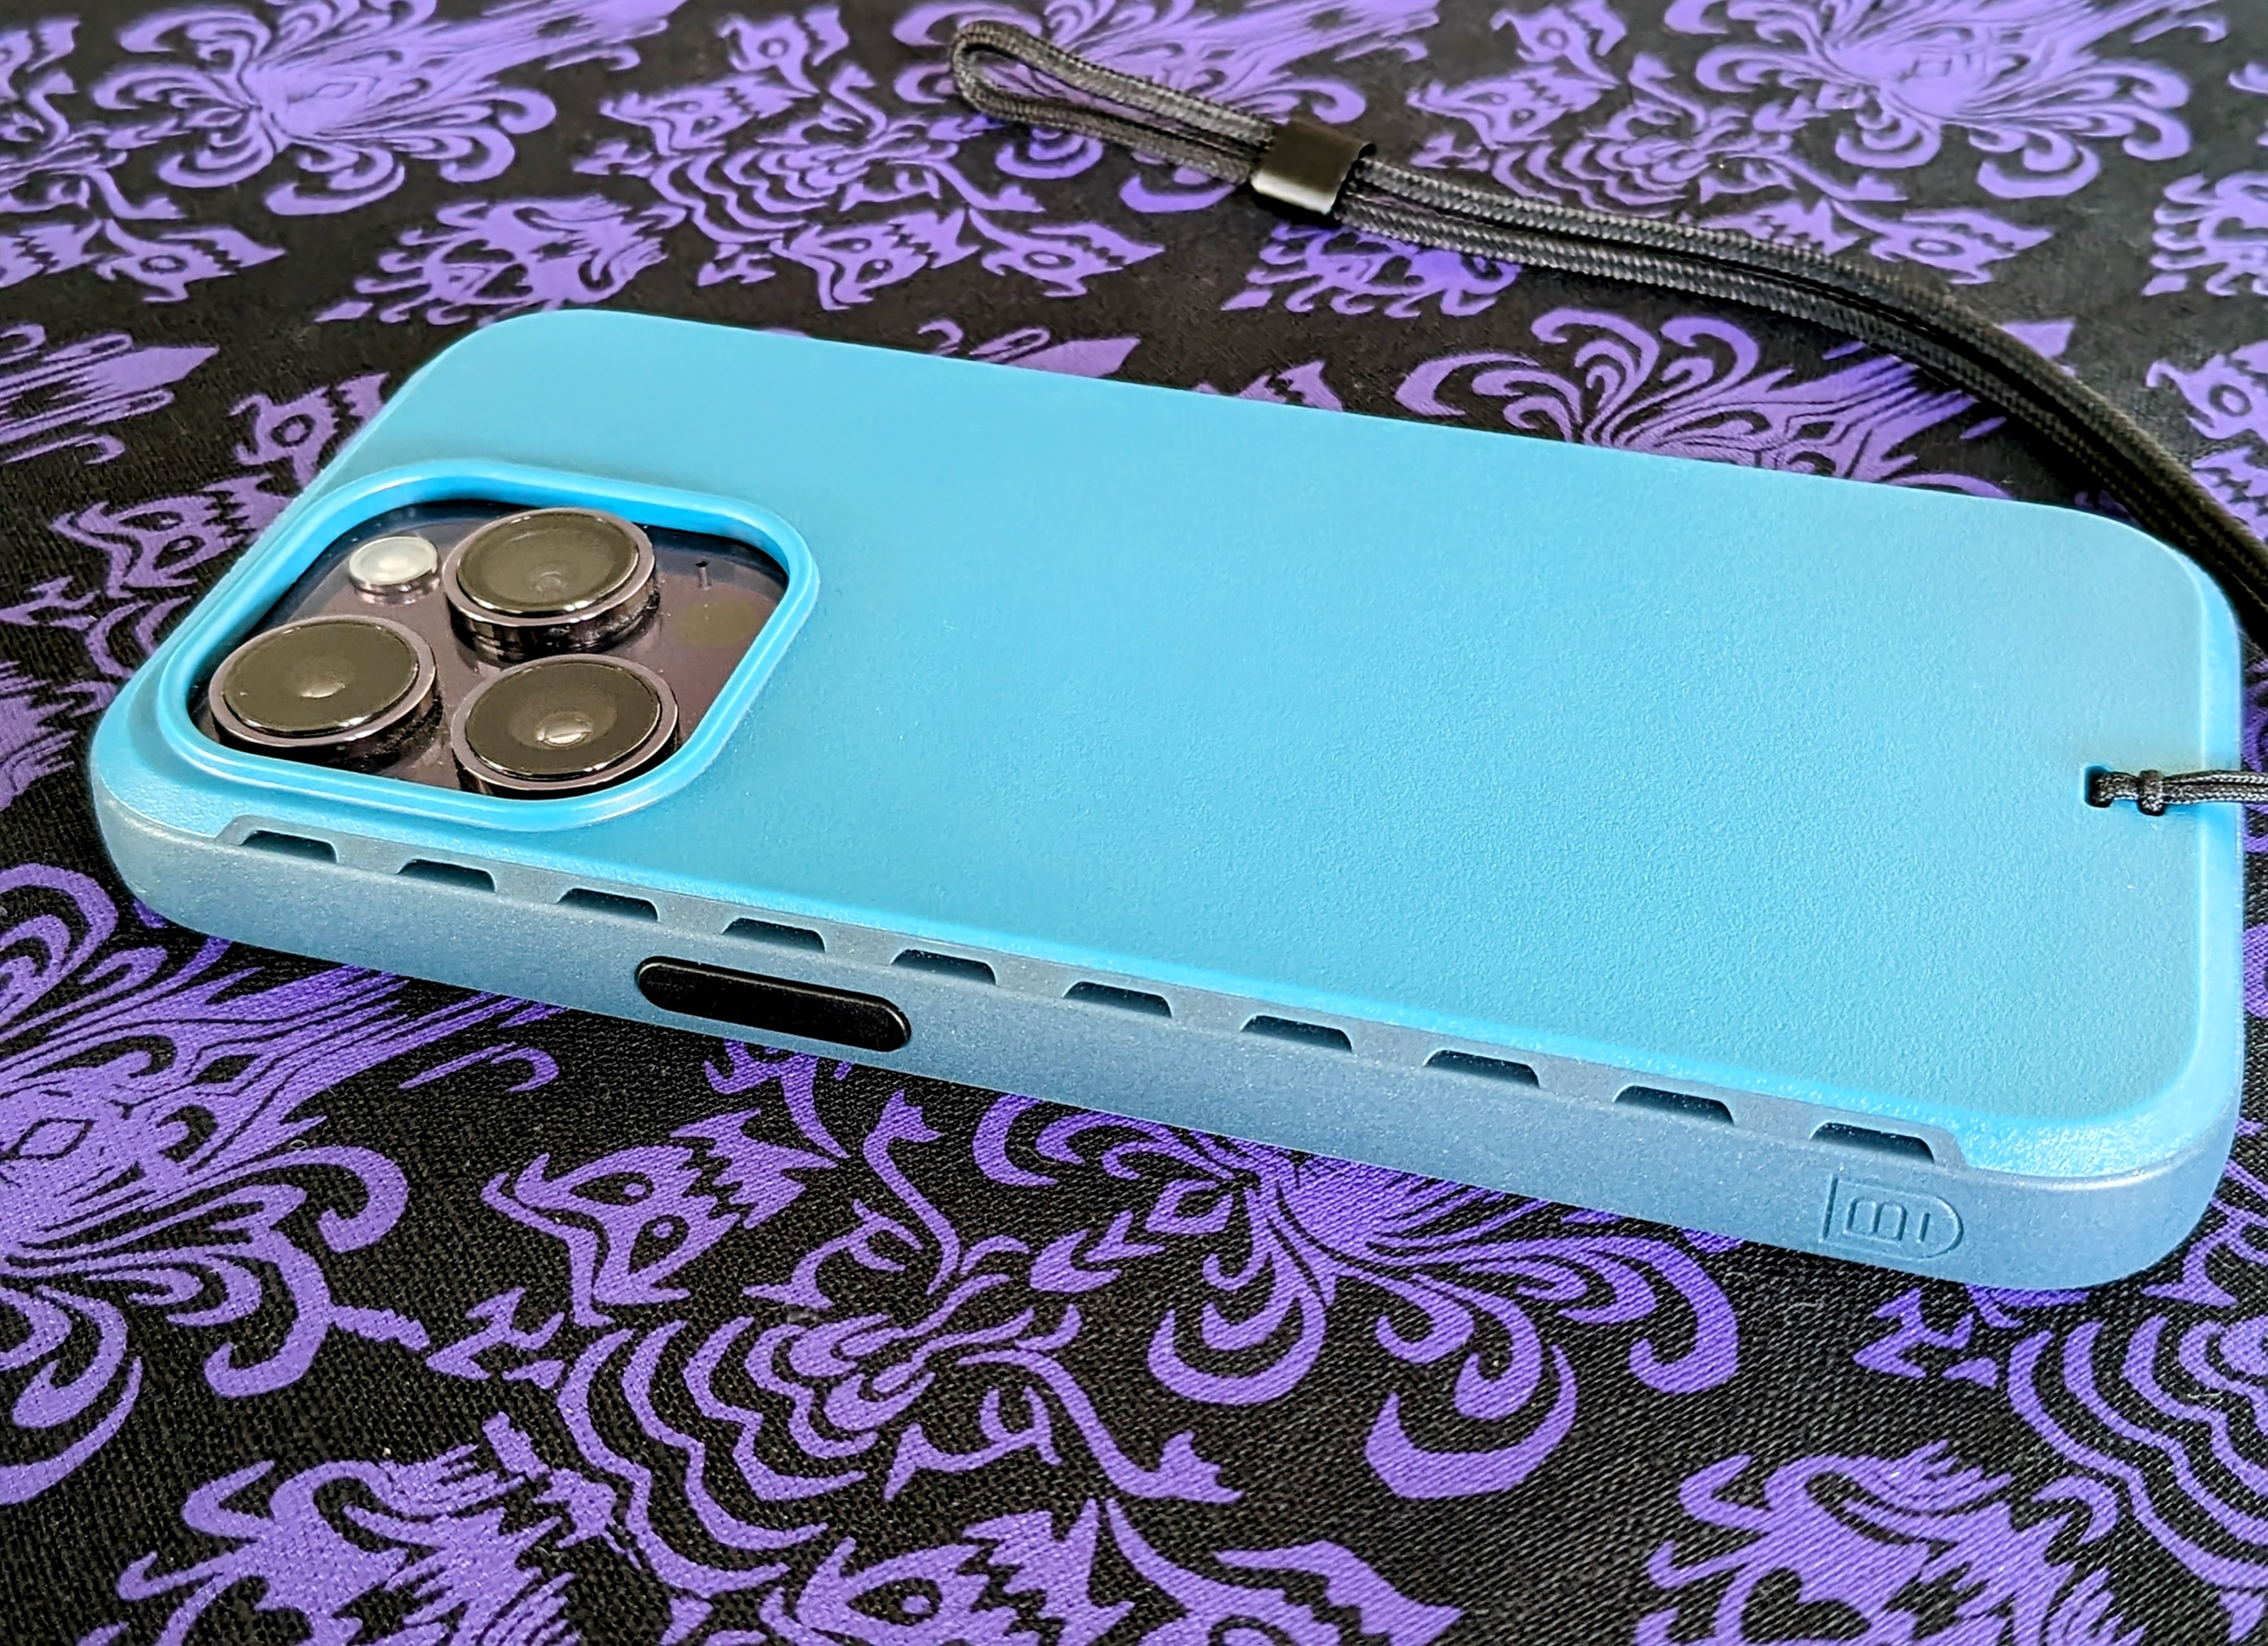 BodyGuardz Paradigm Pro for iPhone 14 Pro case in Hydro showing off side vents.